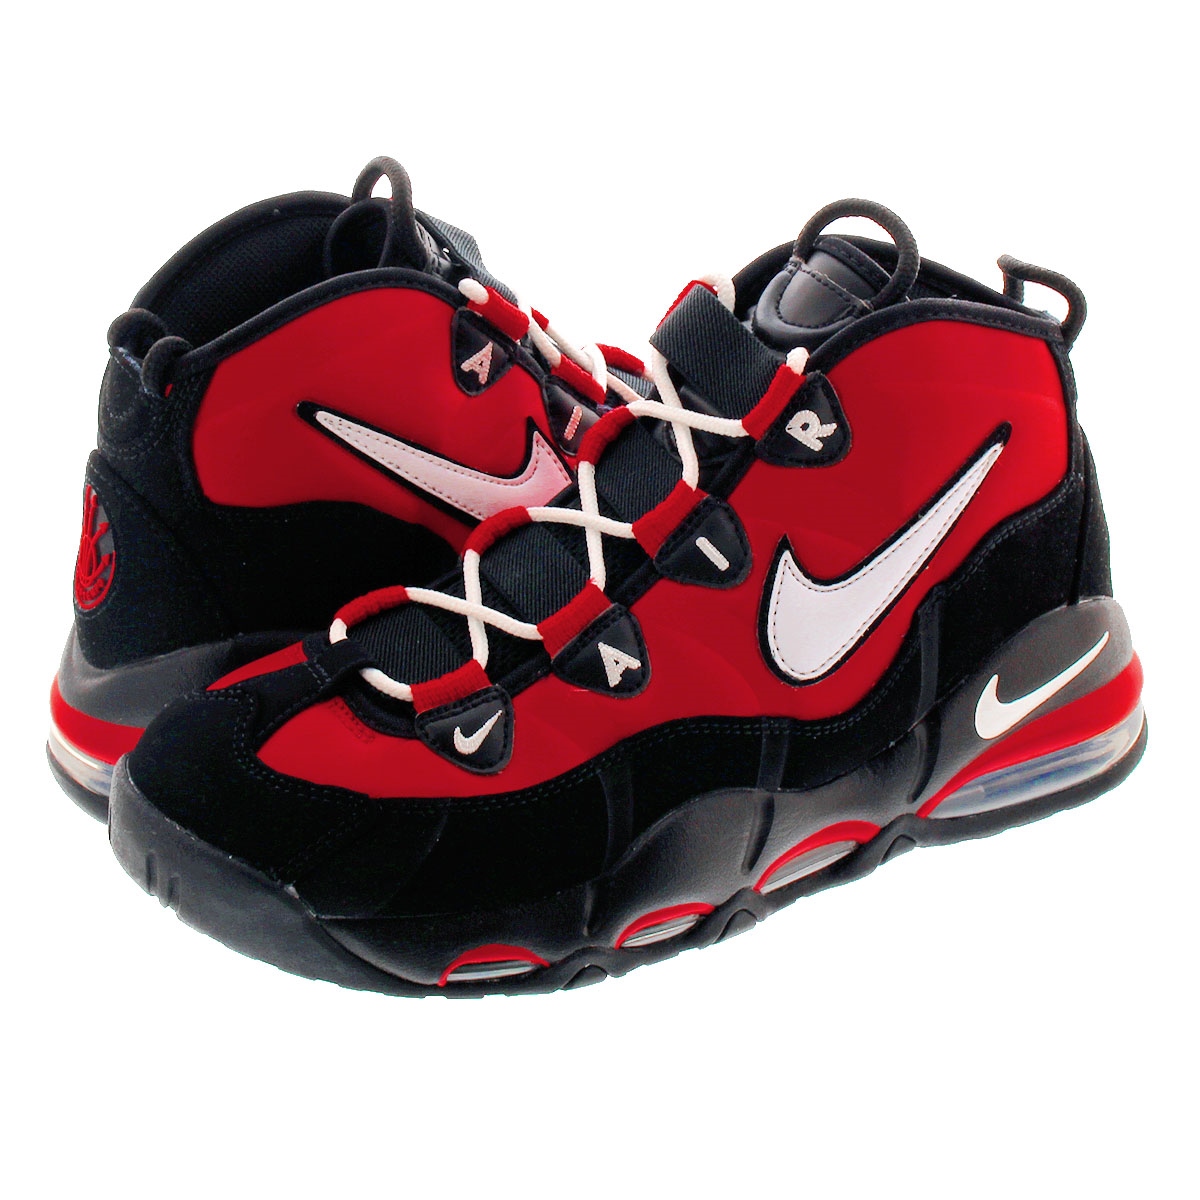 nike uptempo 95 red